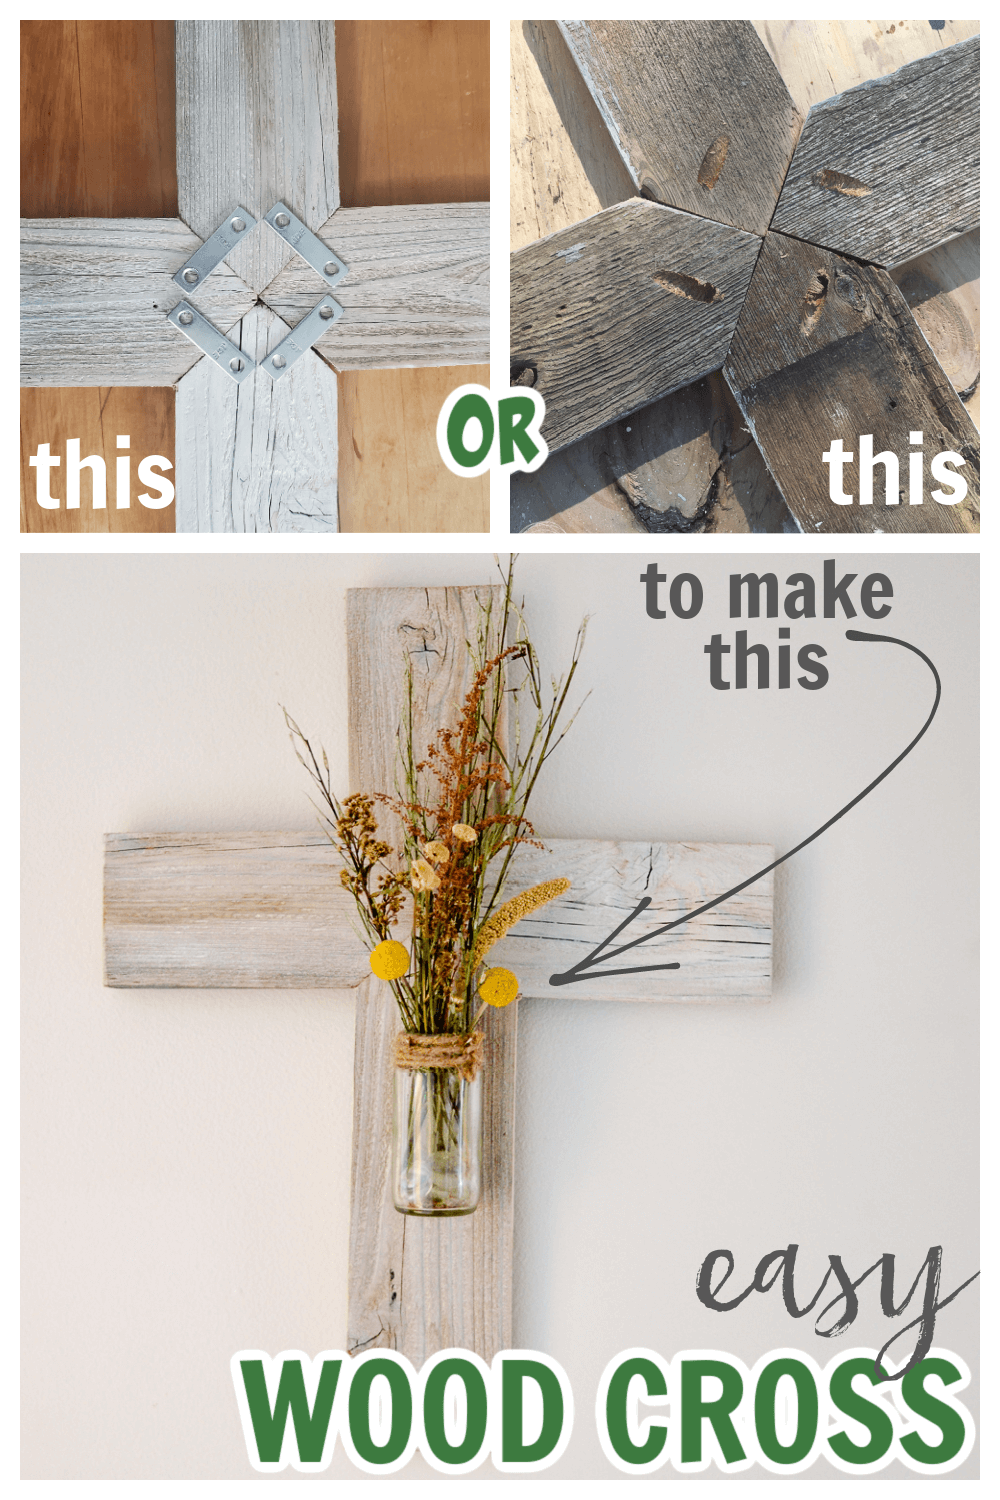 reuse scrap wood or an old fence picket to make a wooden cross with a glass jar flower vase